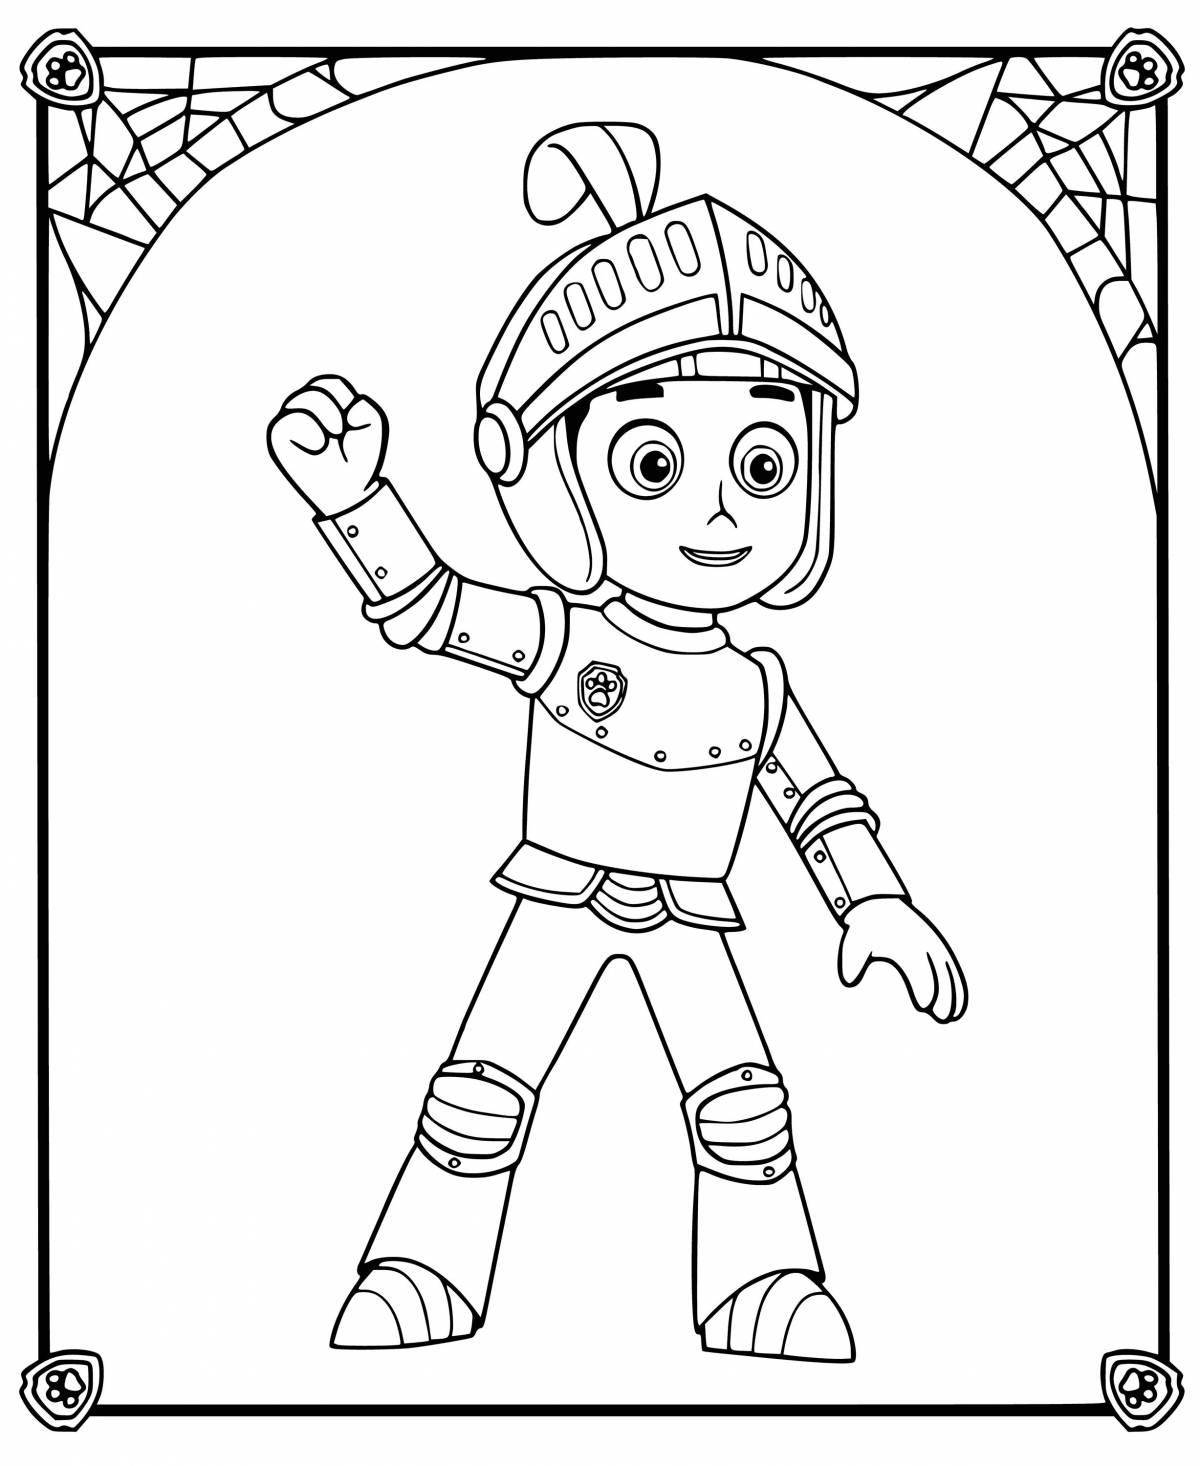 Courageous rider coloring page